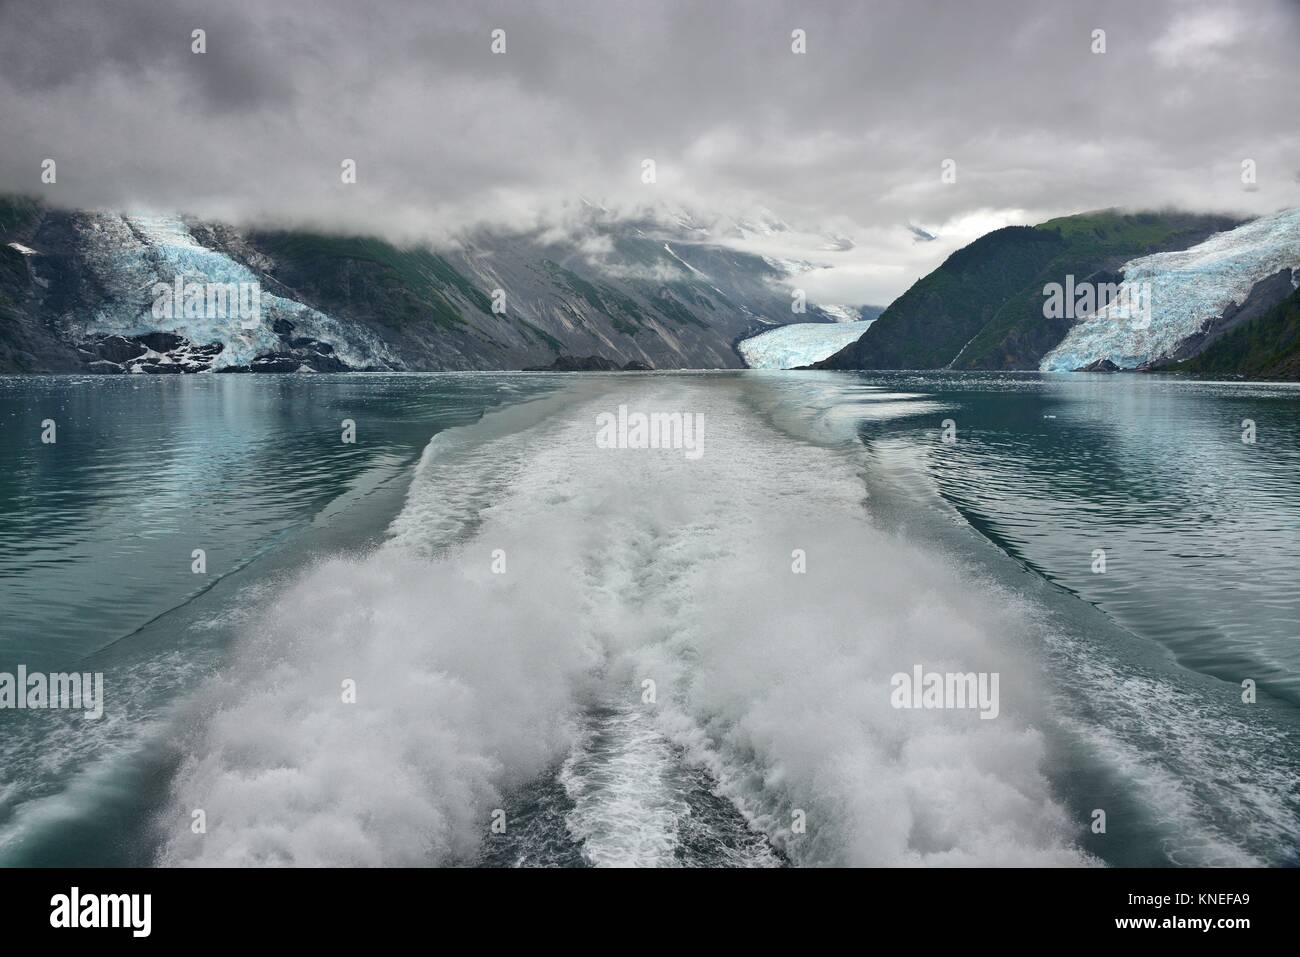 Wake of a boat sailing in Prince William Sound, Chugach National Forest, Alaska, United States Stock Photo